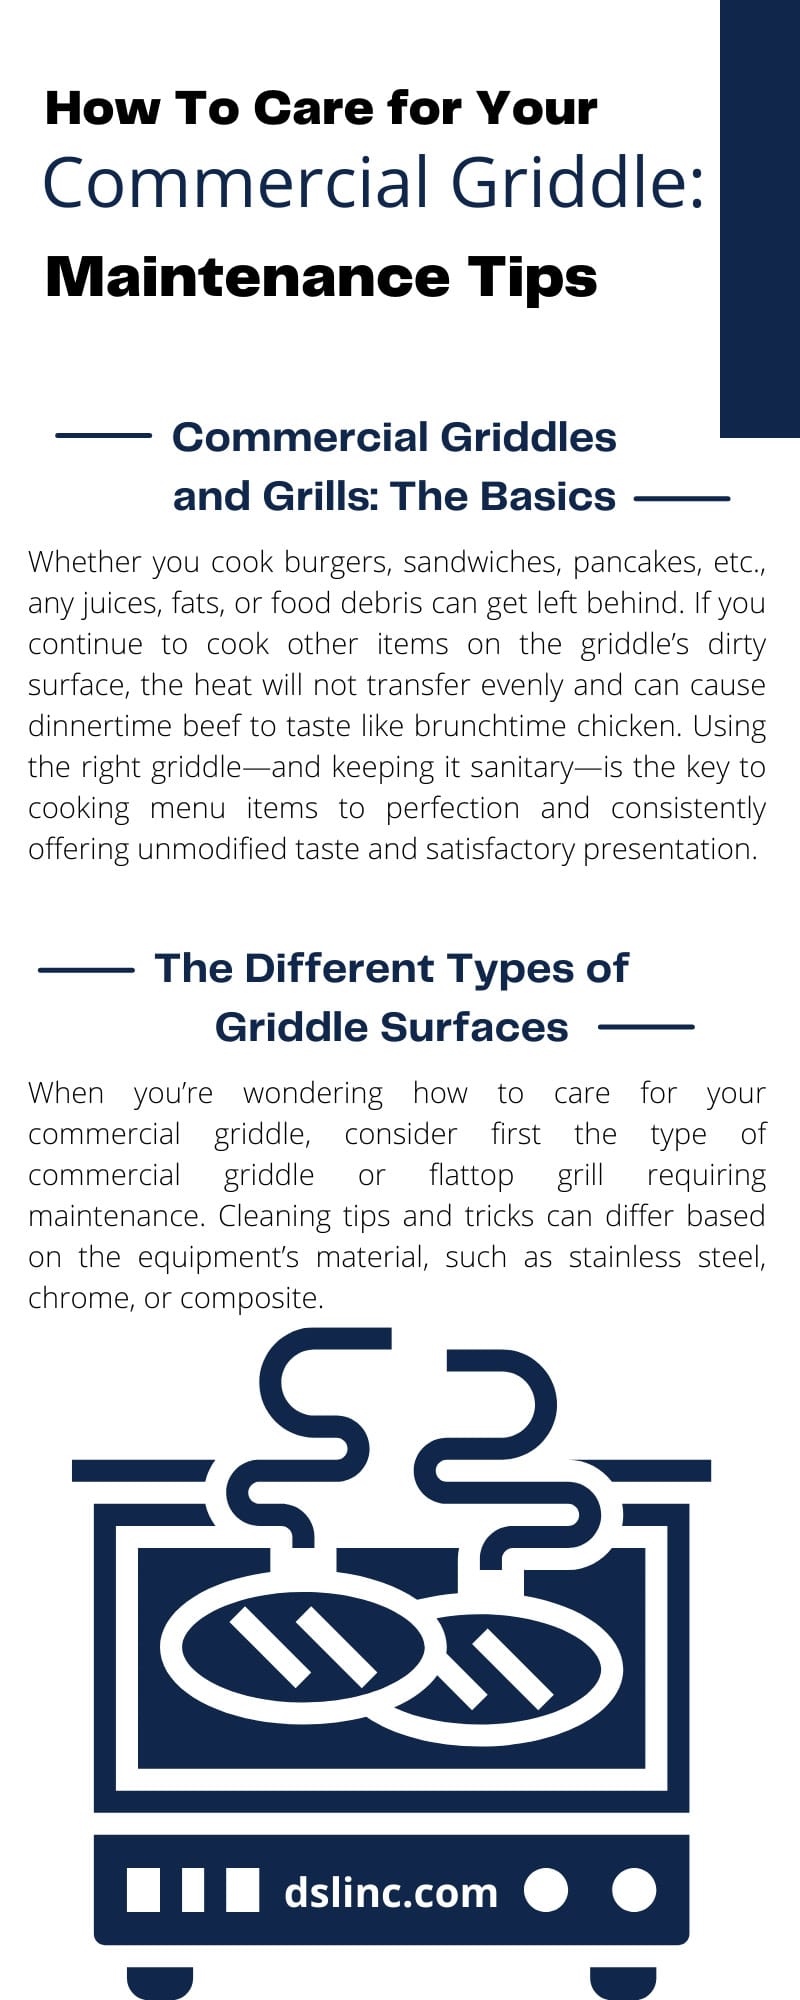 How To Care for Your Commercial Griddle: Maintenance Tips